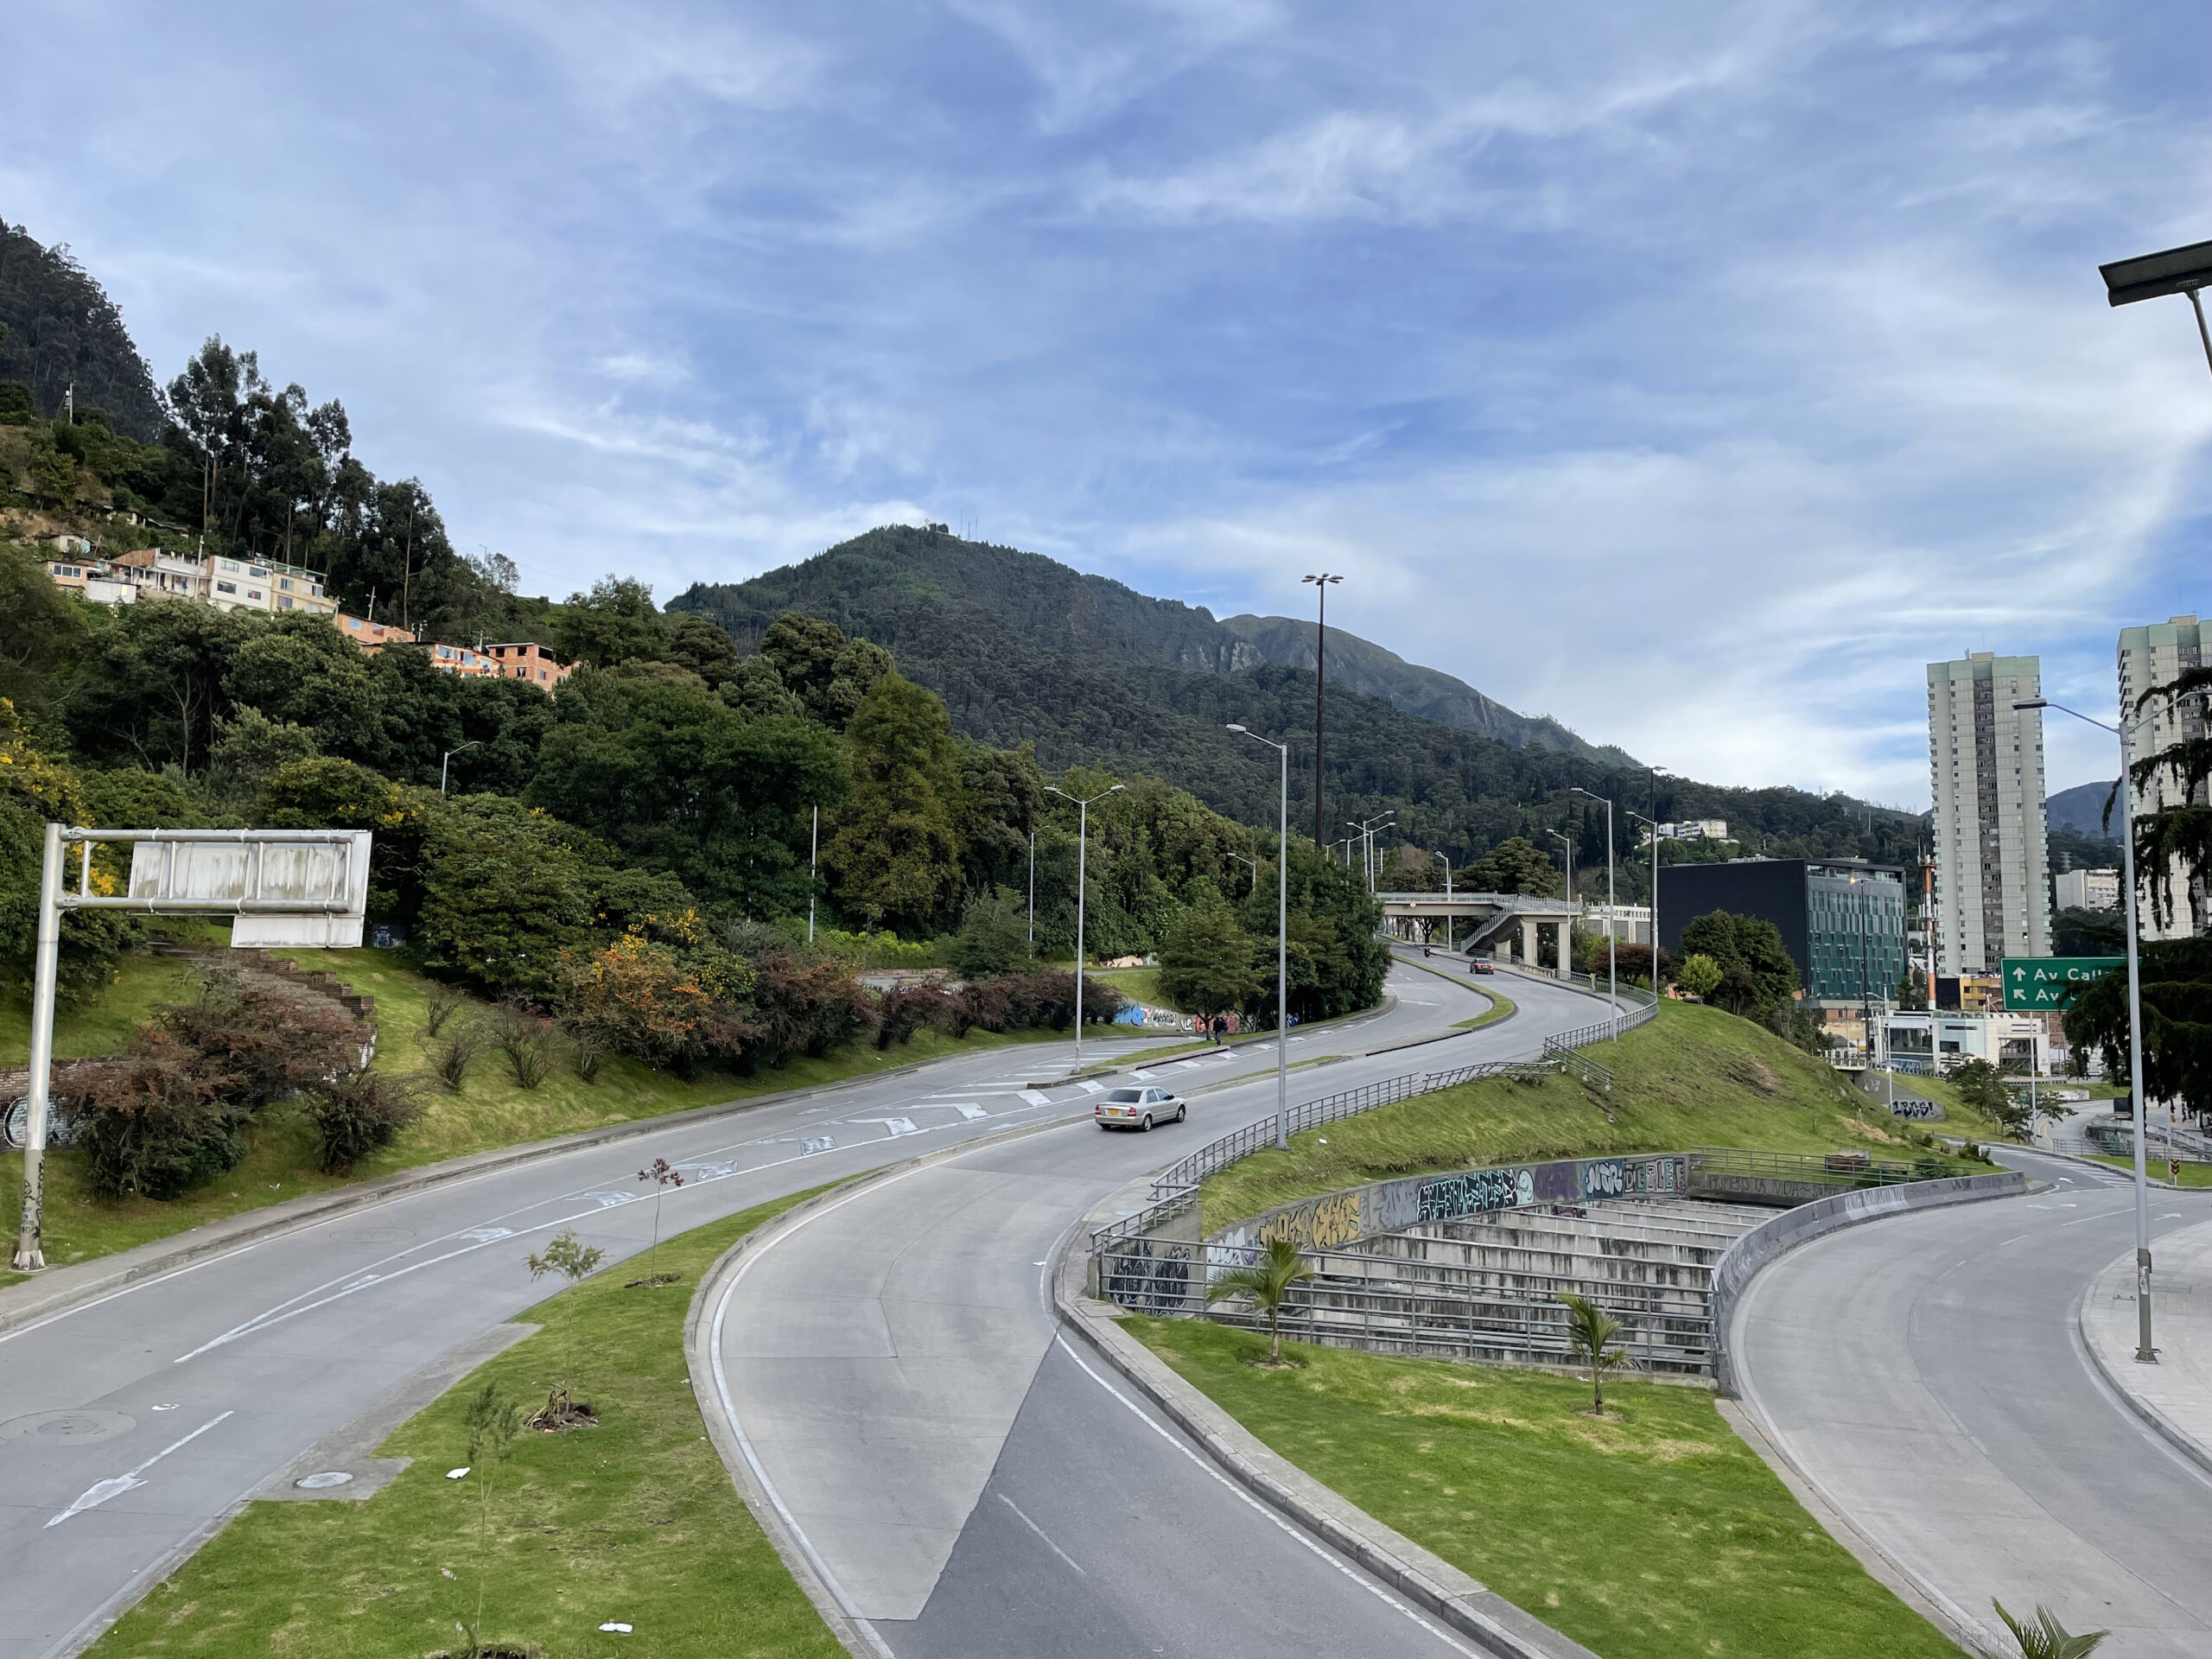 Bogotá: new app helps enforce congestion charges